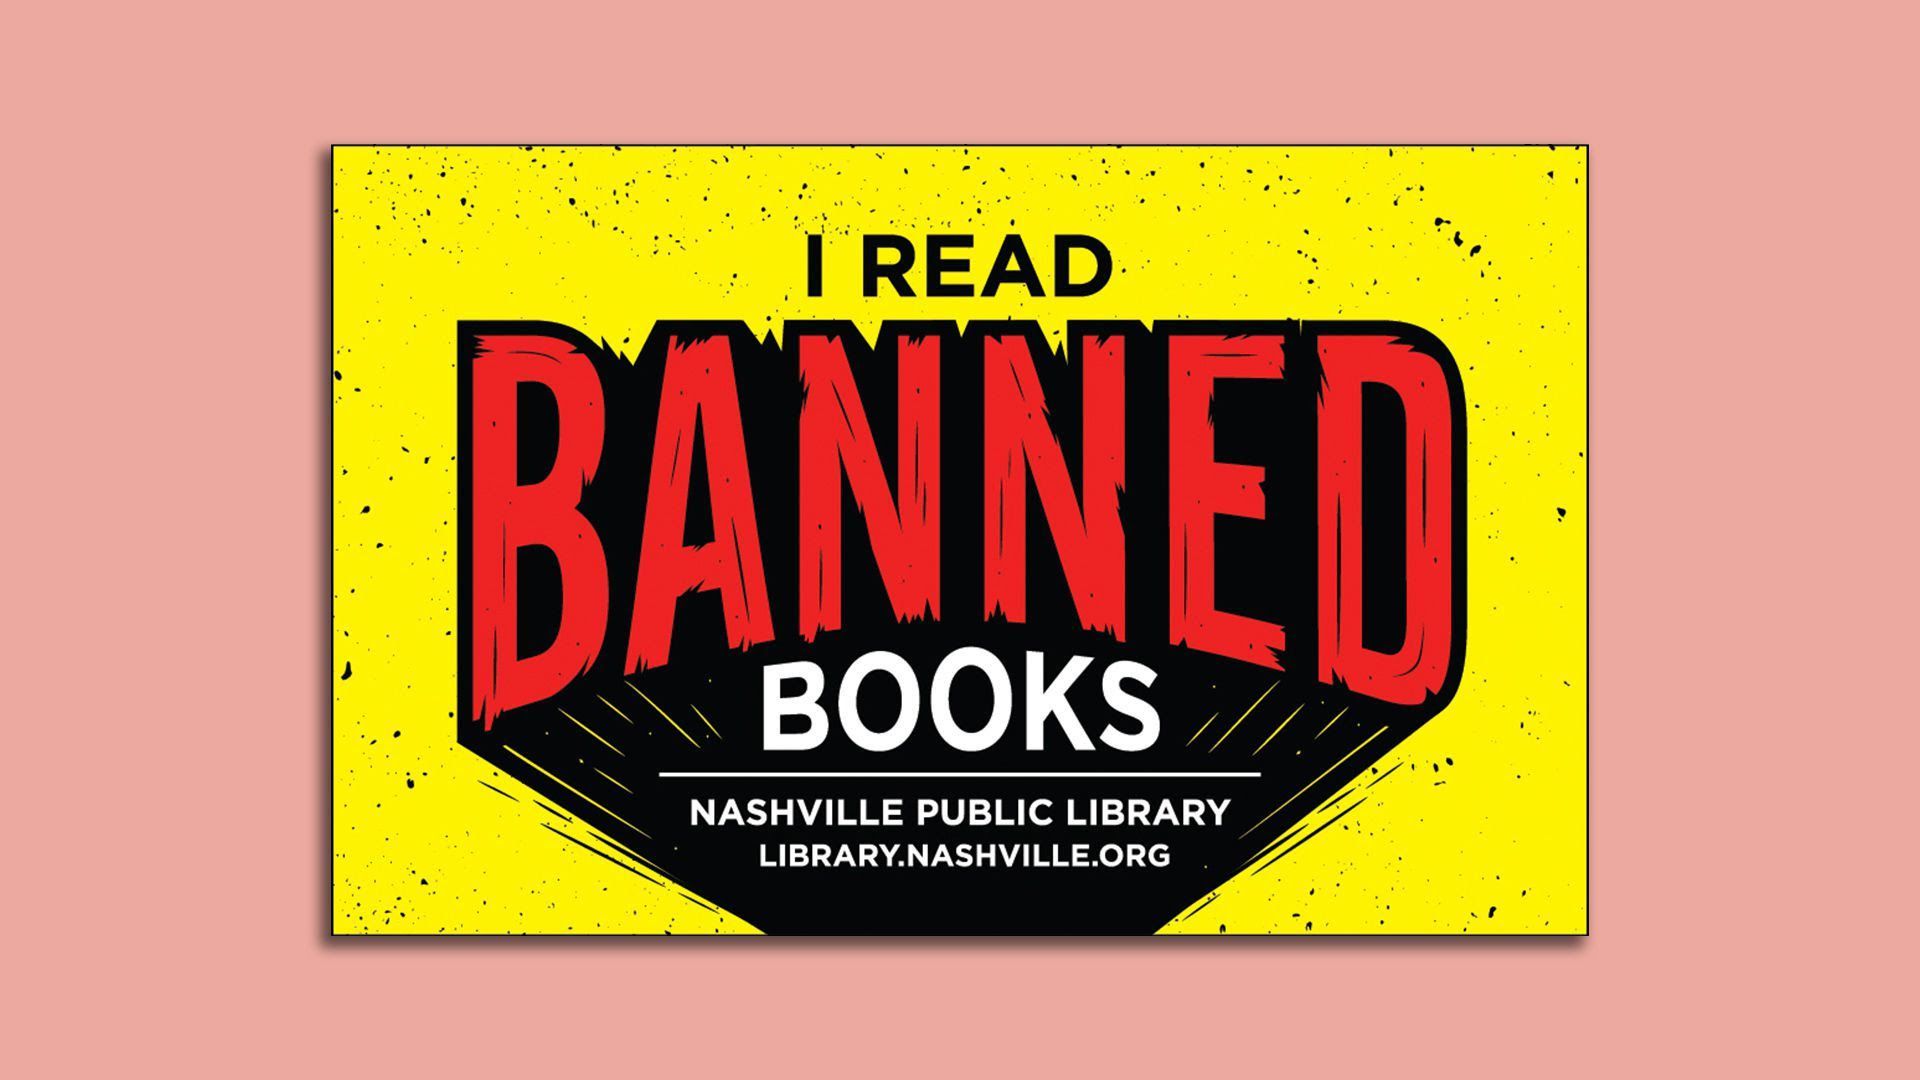 Banned books library card in Nashville.